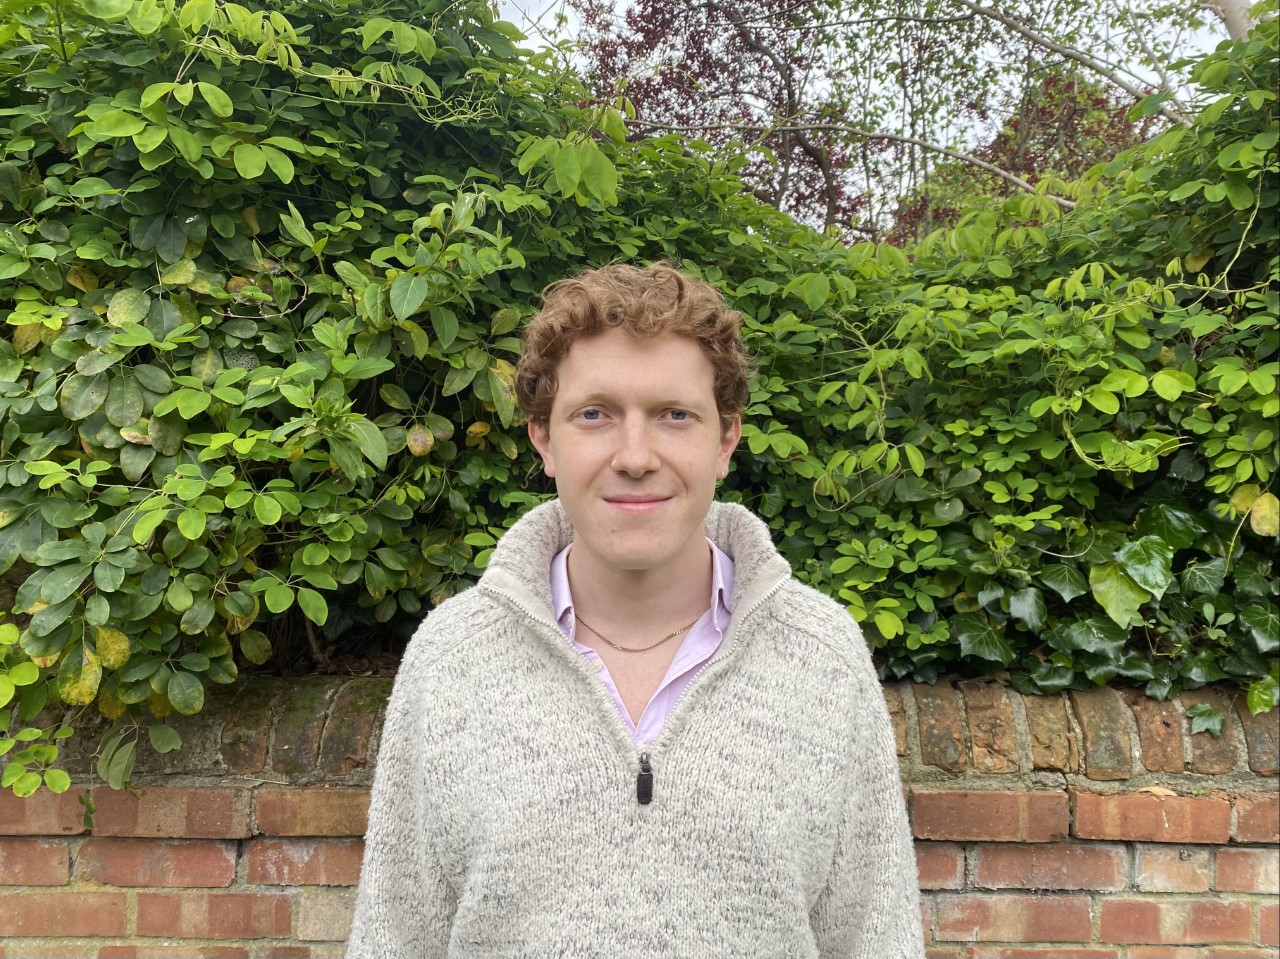 Pete Rae smiling and standing in front of bushes, wearing a cream cardigan.